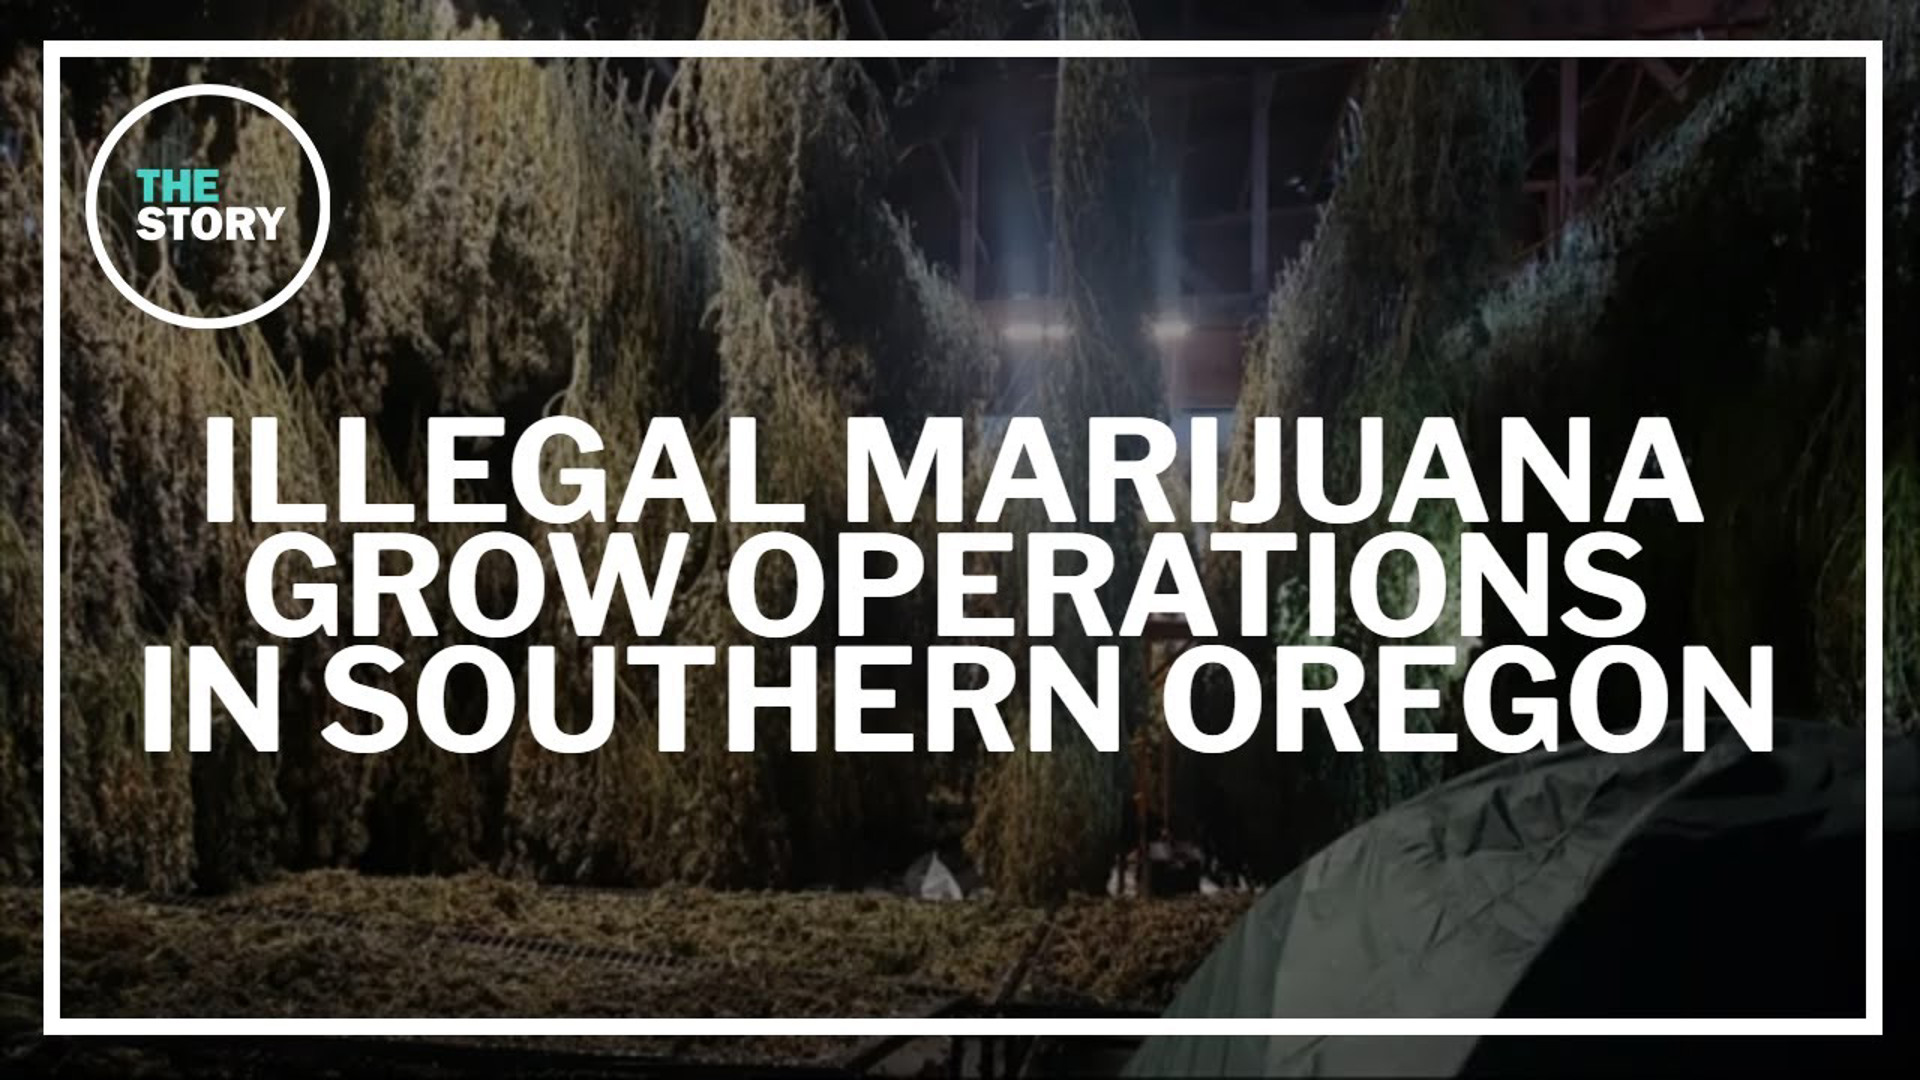 The county says illegal marijuana grows are overwhelming the legal system and water supply.